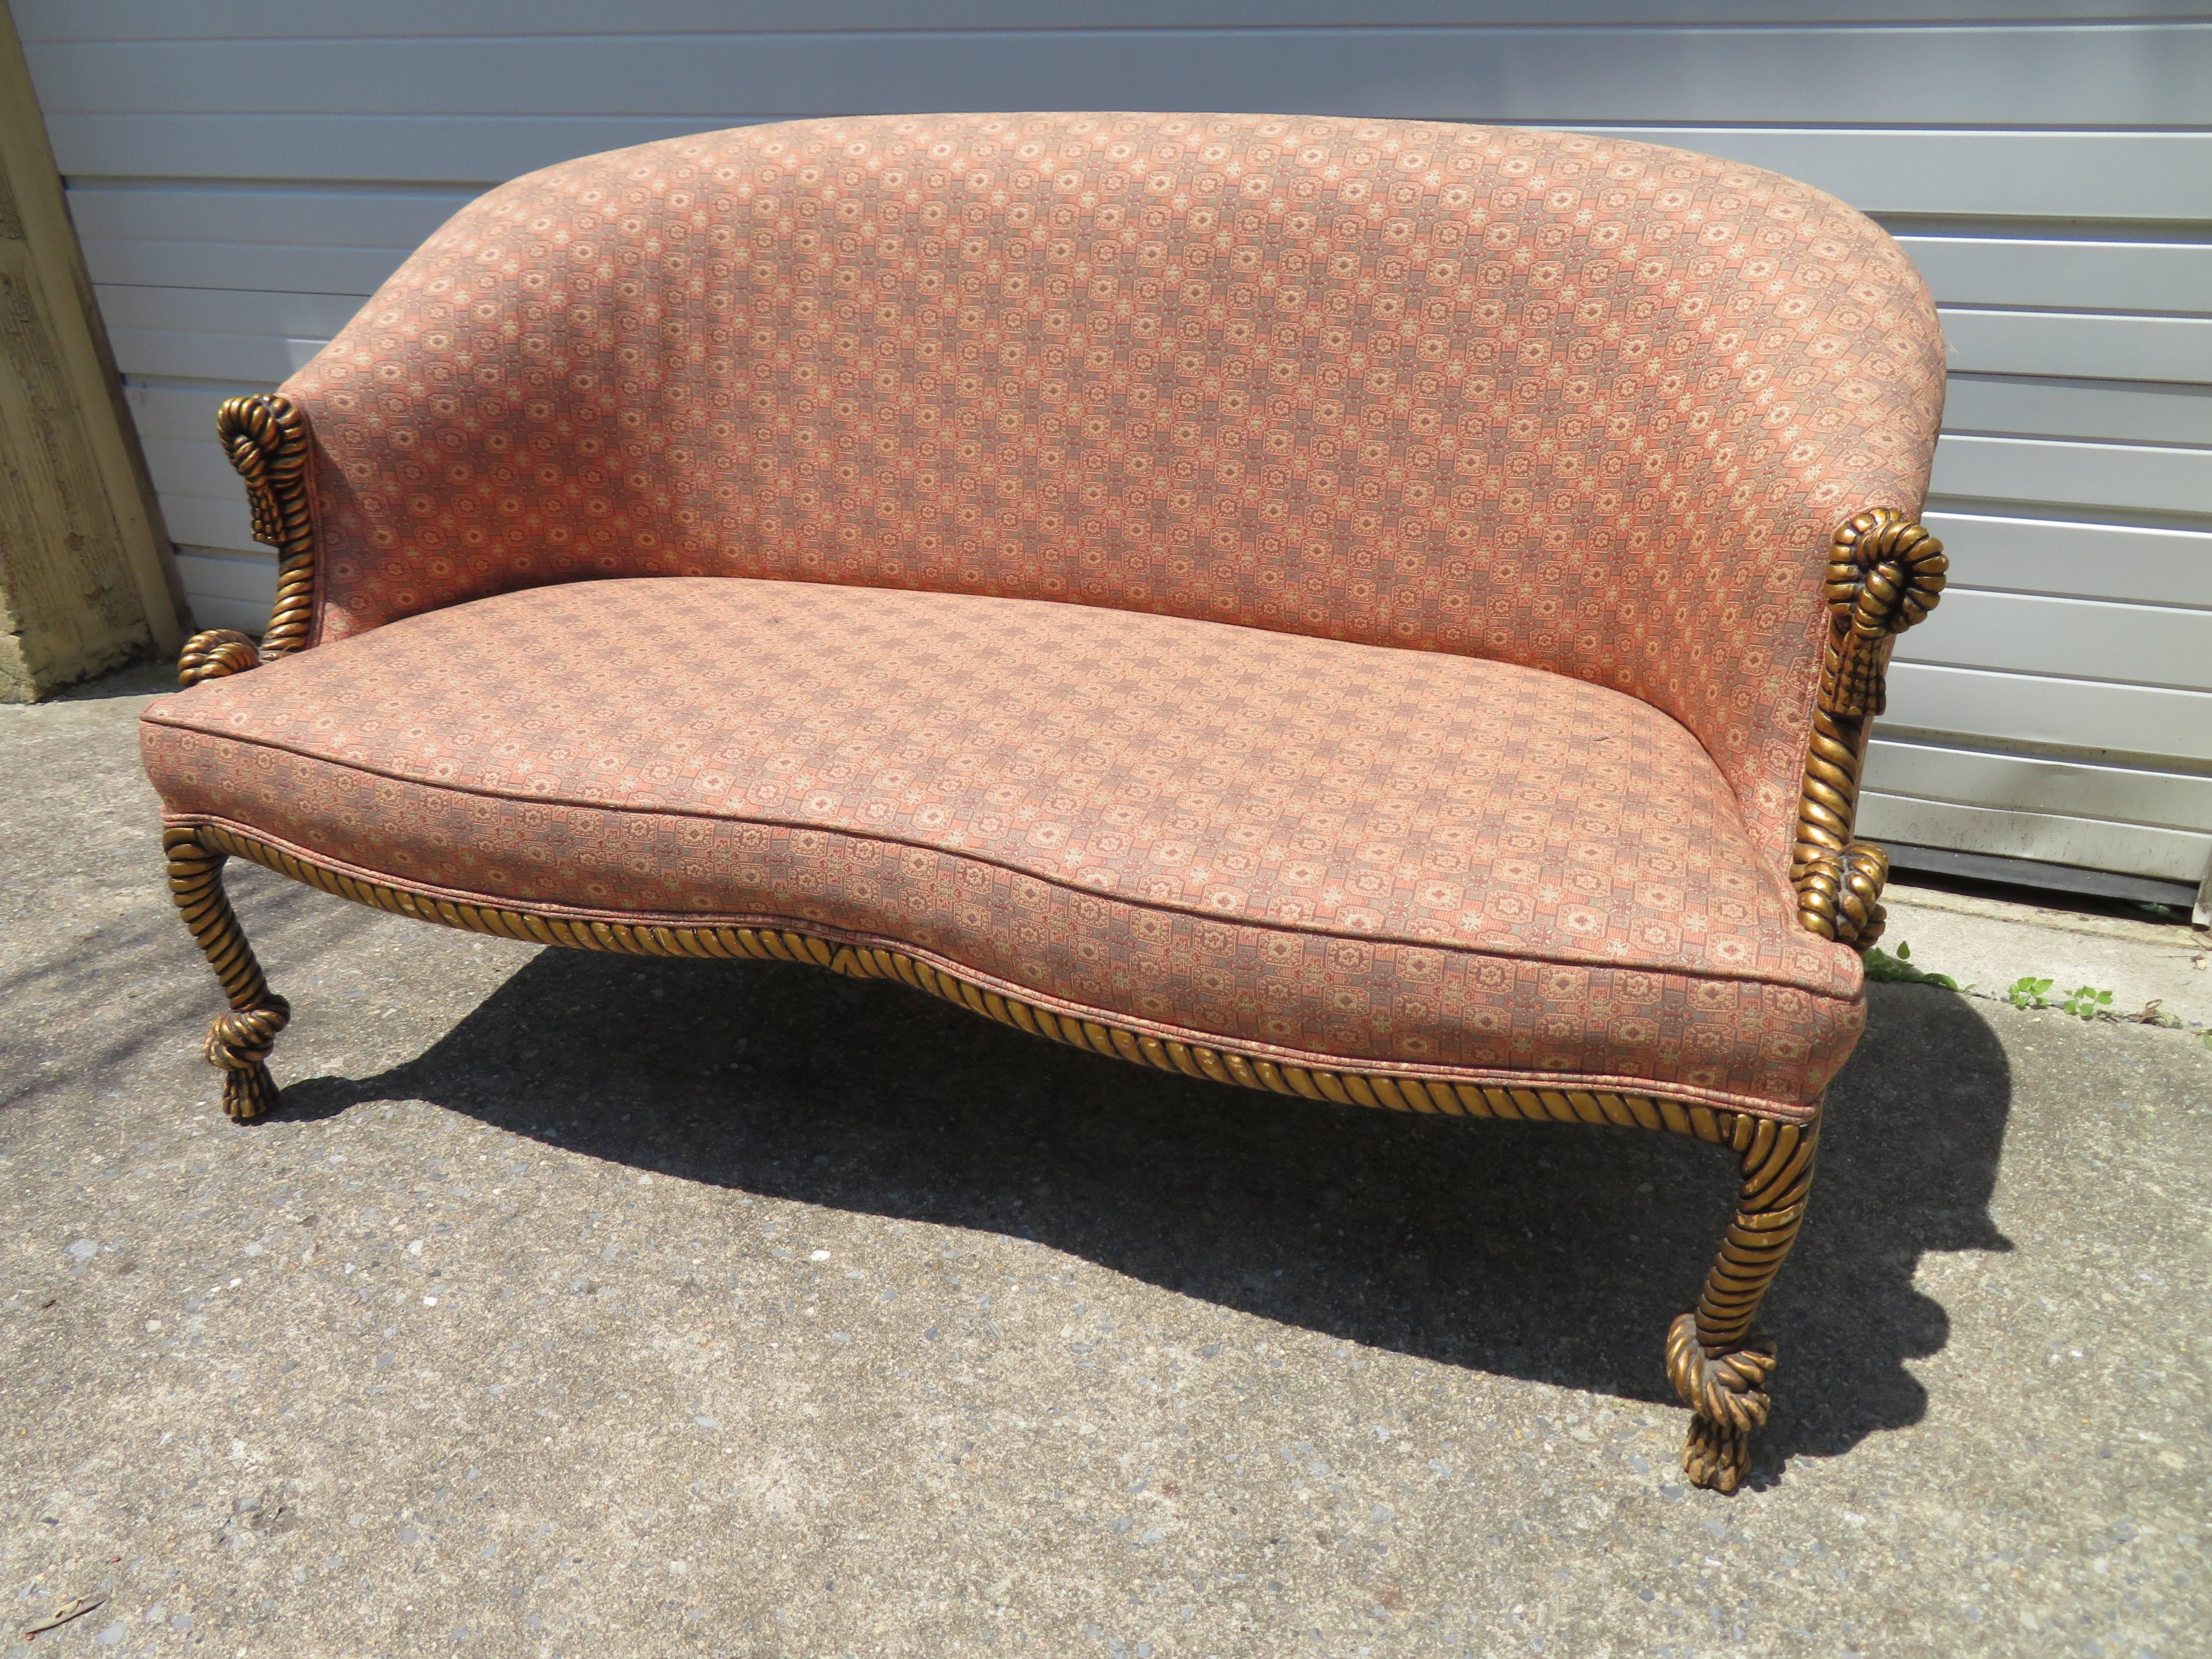 Magnificent rope and tasseled gilded loveseat sofa in the style of Dorothy Draper. This piece retains it's original fabric in presentable condition-we always recommend re-upholstery for pieces with original fabric. We love the petite stature of this